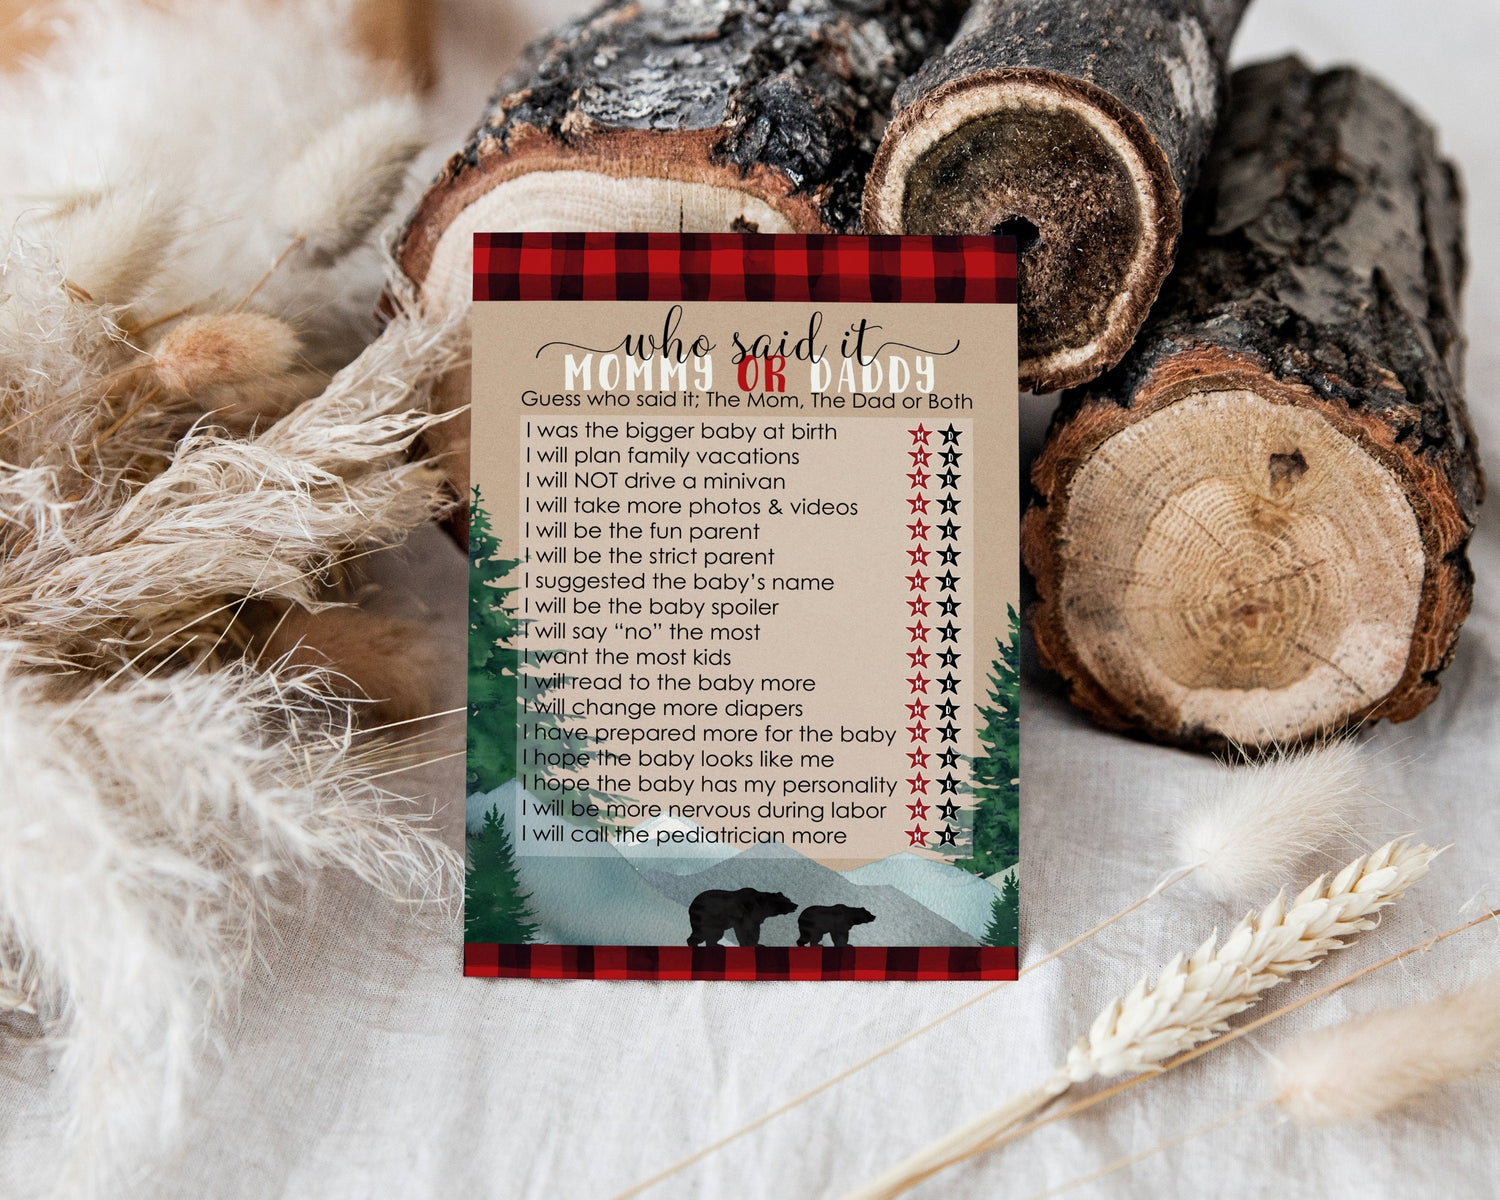 Welcome your little cub with our lumberjack baby shower theme, featuring cozy rustic red and black plaid designs. Our suite includes charming invitations, thank you cards, and games, all crafted to create warm memories for your woodland celebration.